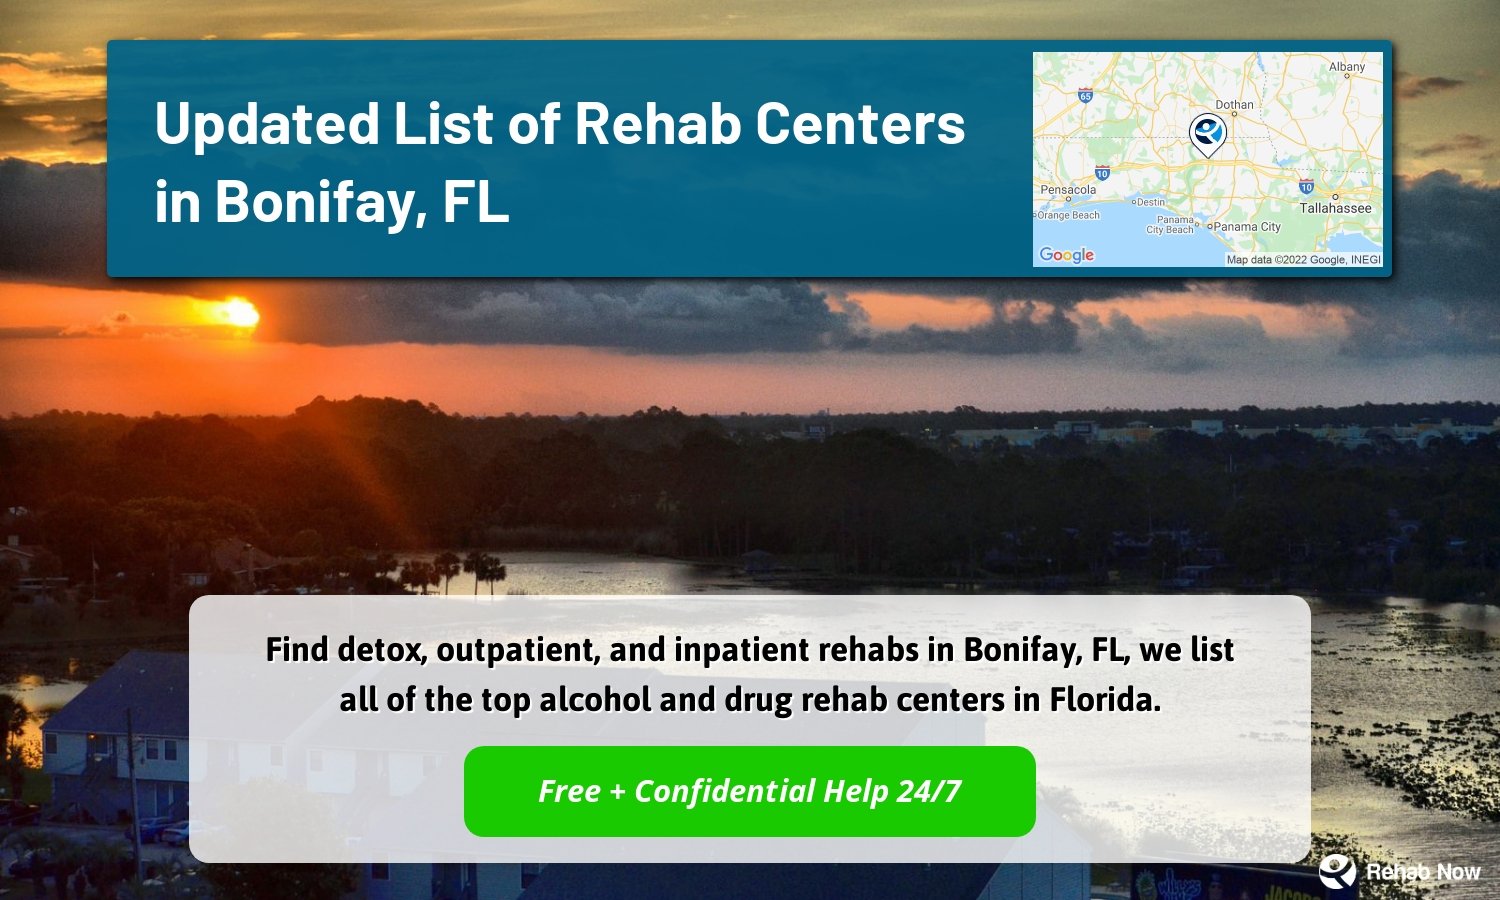 Find detox, outpatient, and inpatient rehabs in Bonifay, FL, we list all of the top alcohol and drug rehab centers in Florida.